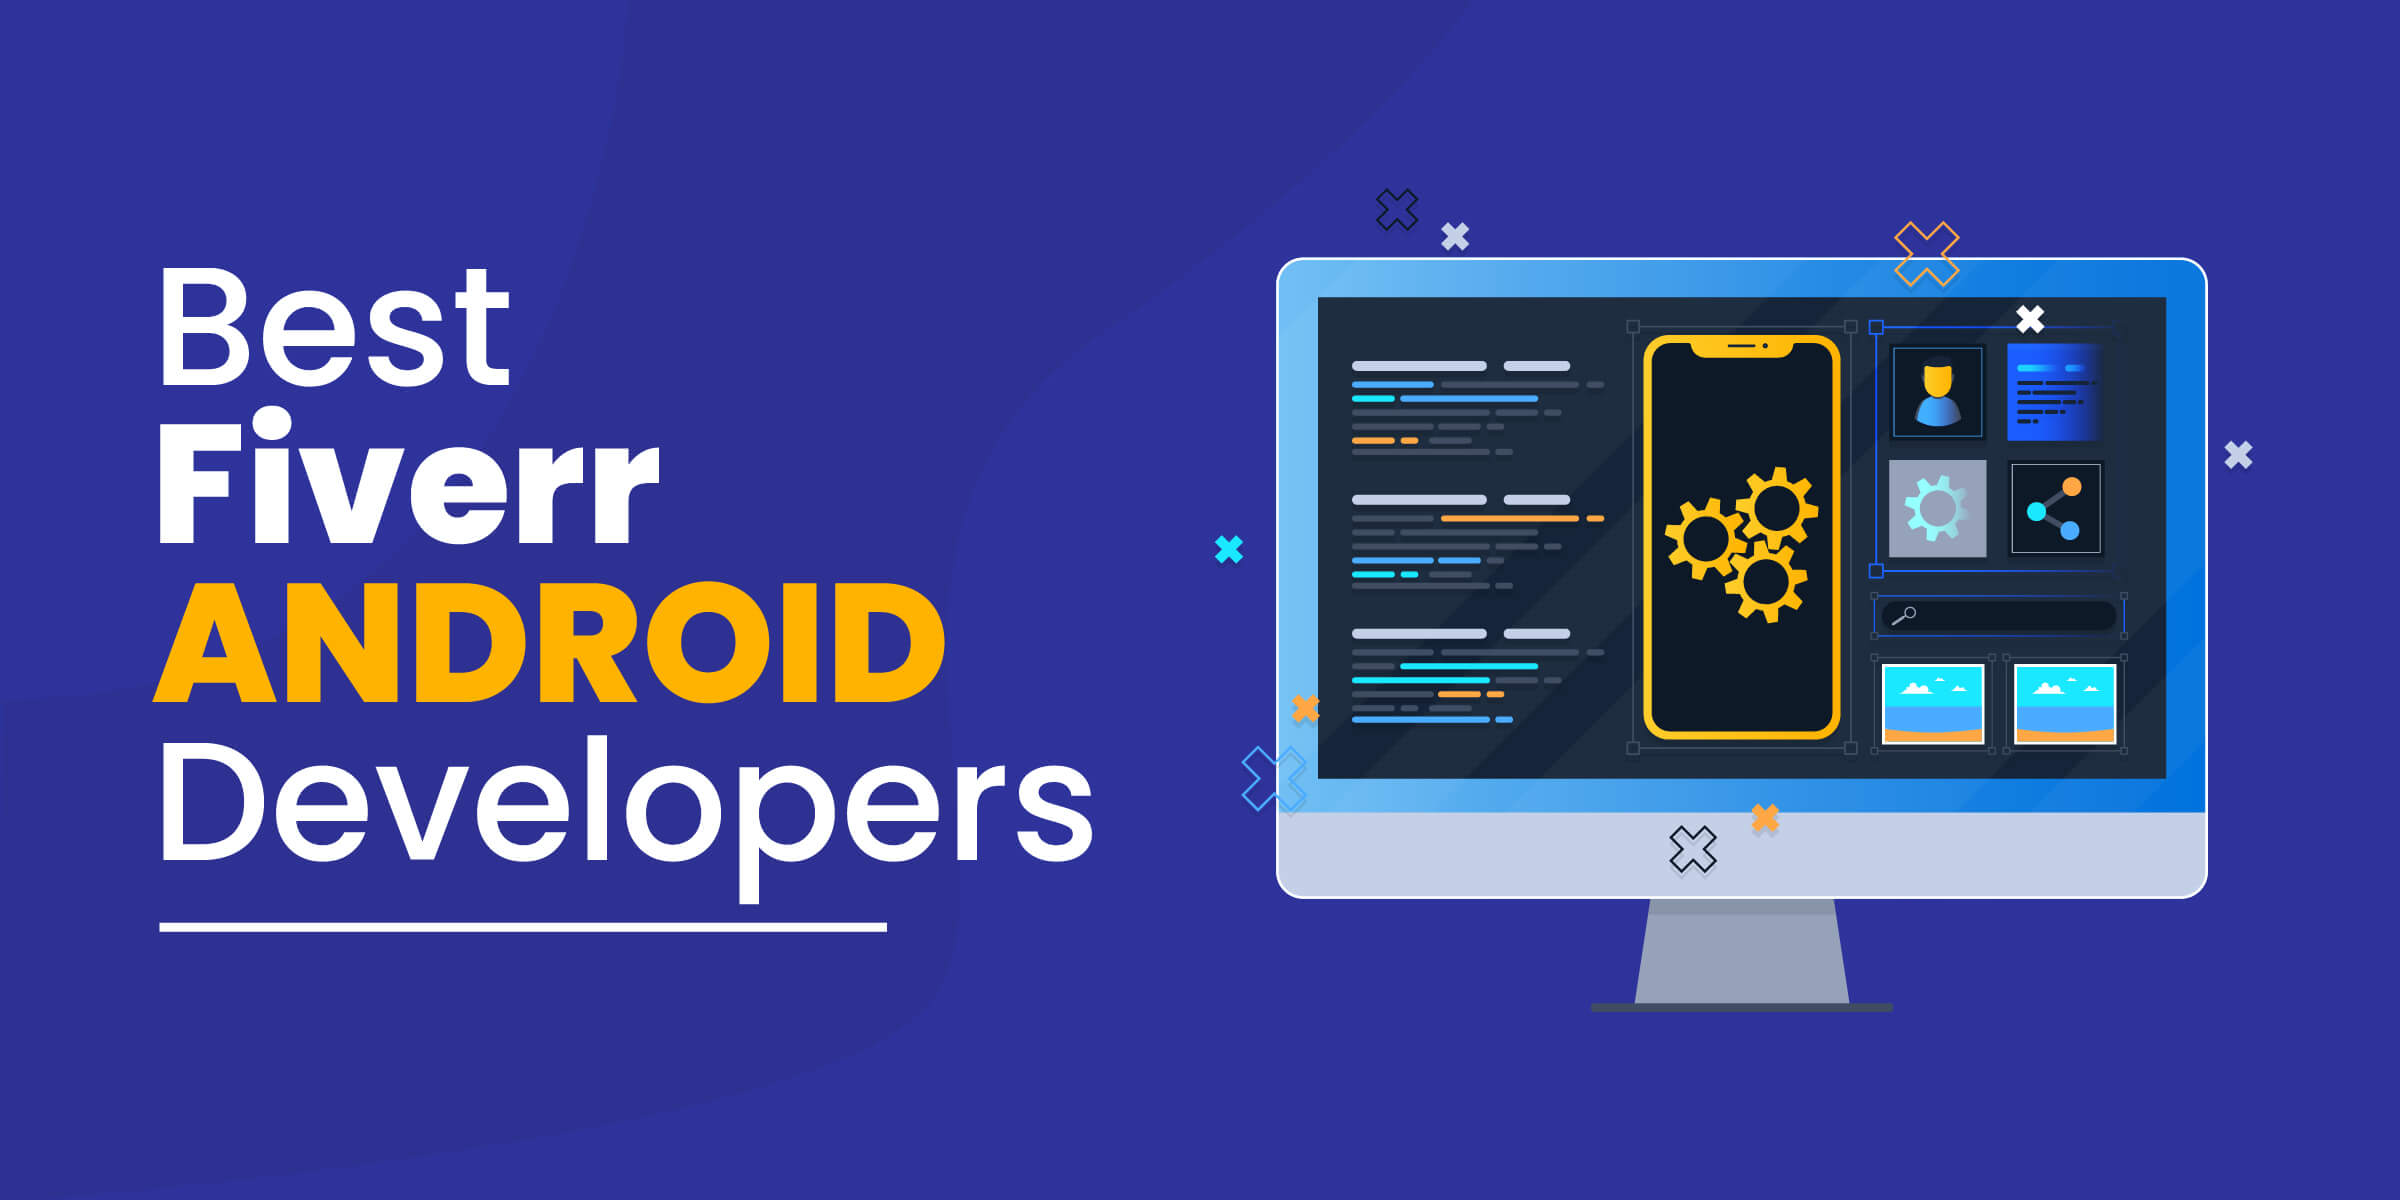 Best Fiverr Android Developers